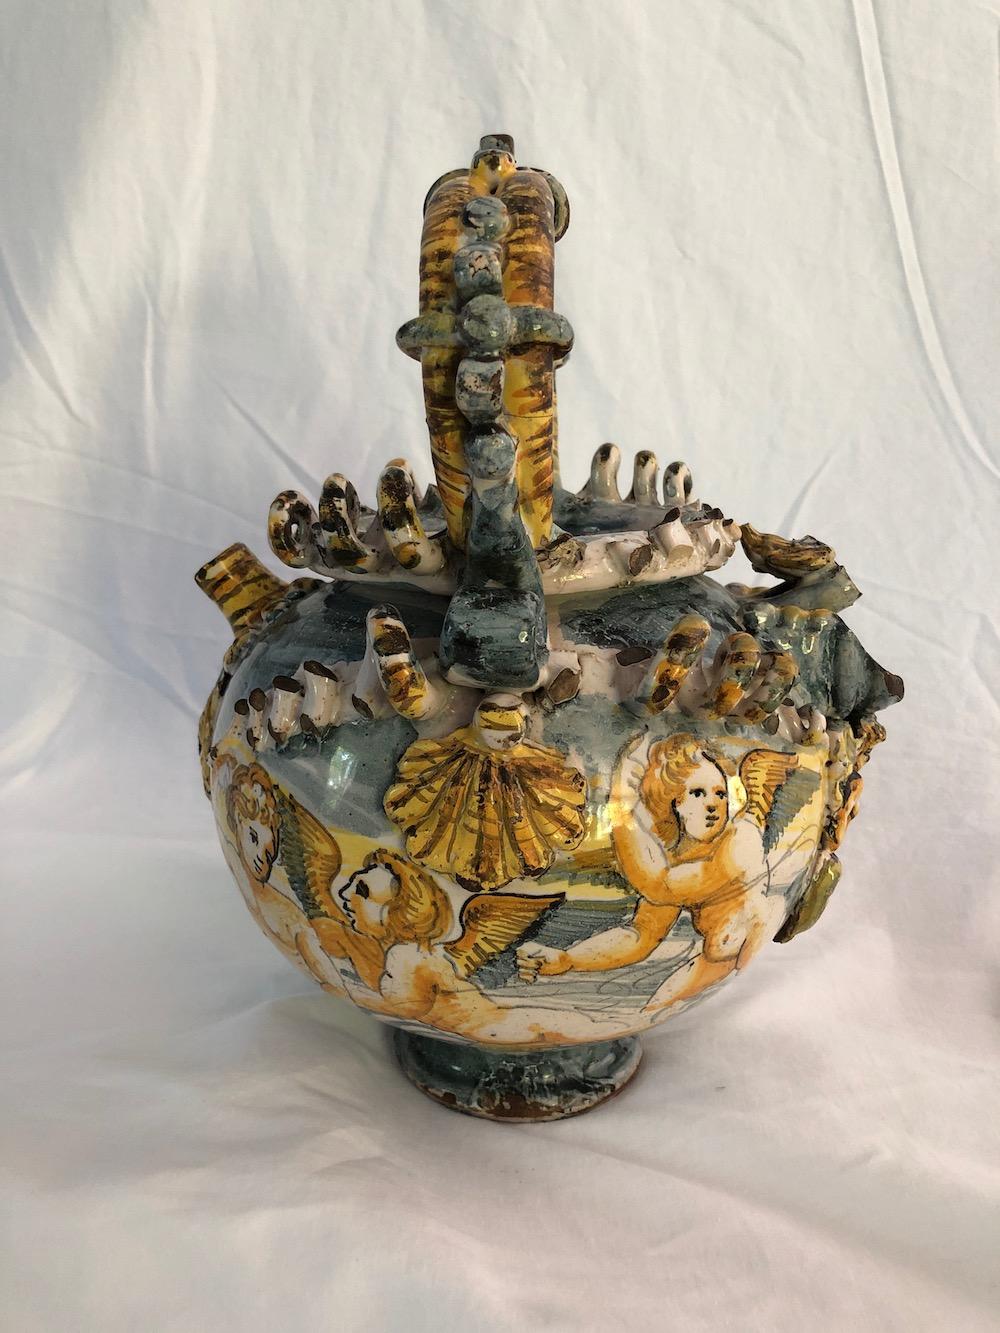 17th century Majolica wet drug jar with cupids in relief. Good condition but has several cracks for due to its age. Sold as is.